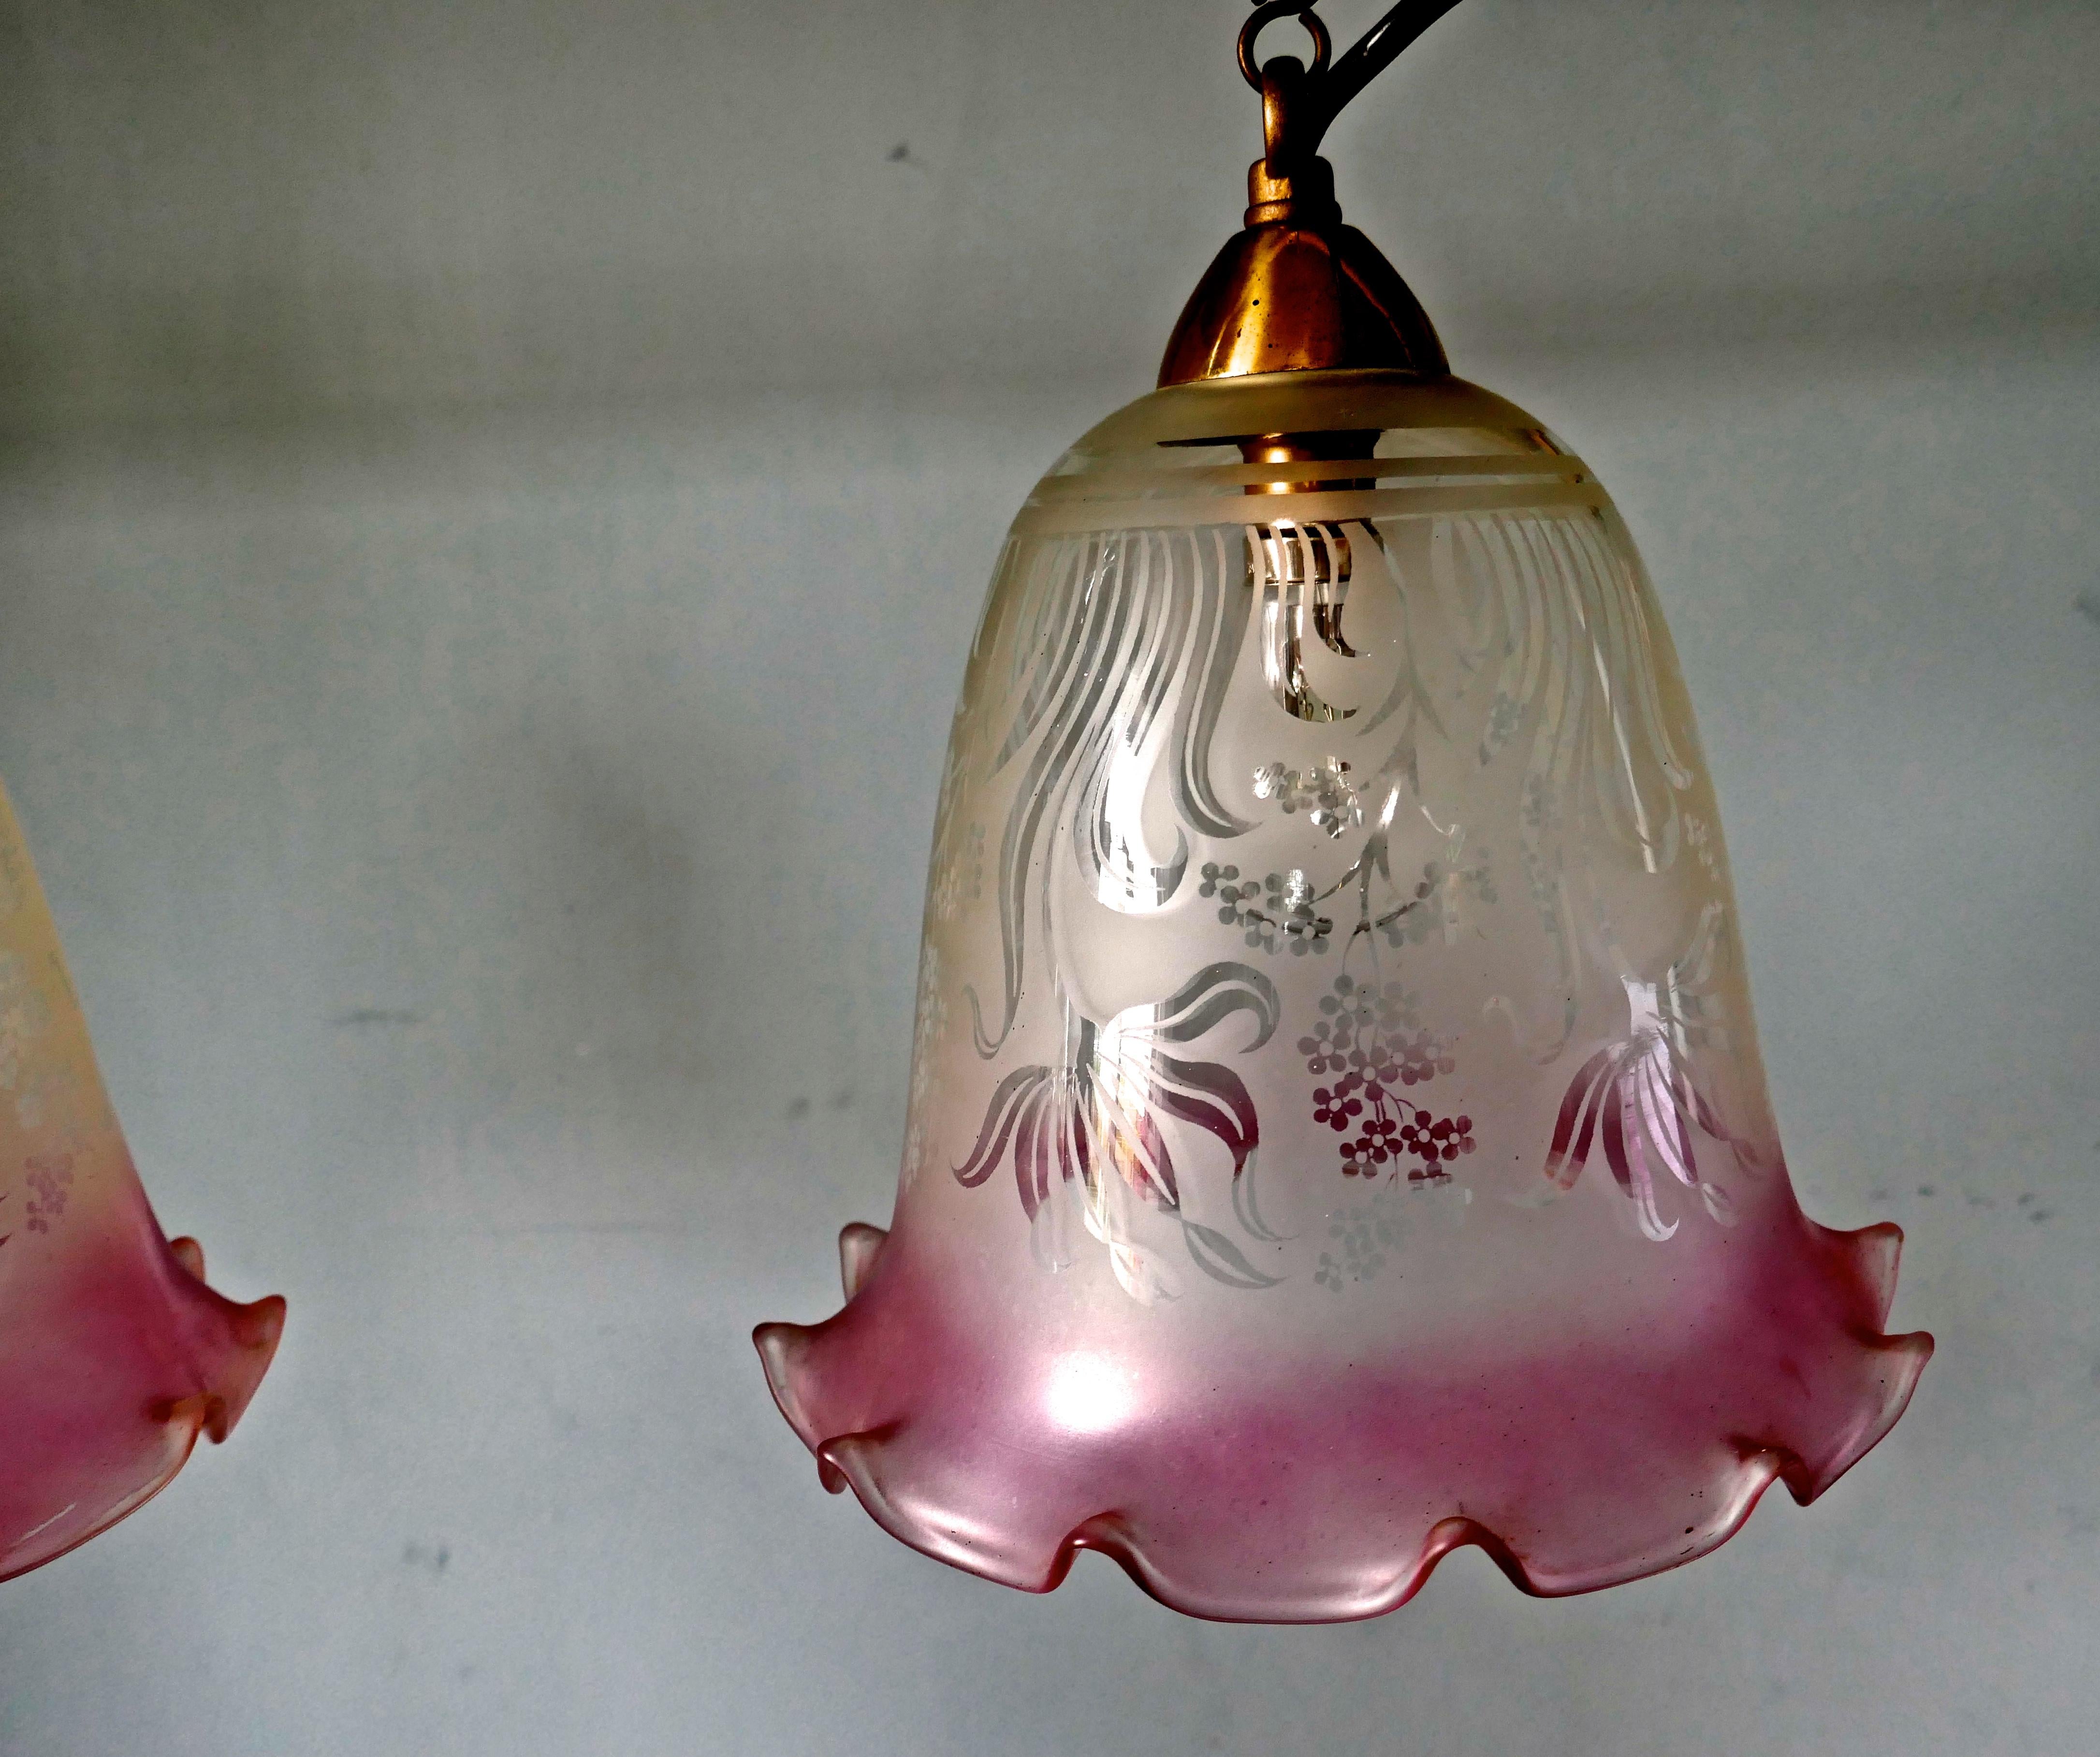 A pair of large glass ceiling lights with etched, pink and clear pendant lampshades.

A lovely pair of ceiling lights, the lights have etched glass lampshades with a wide pink tinted frill, they hang from a small hook, these could have chain